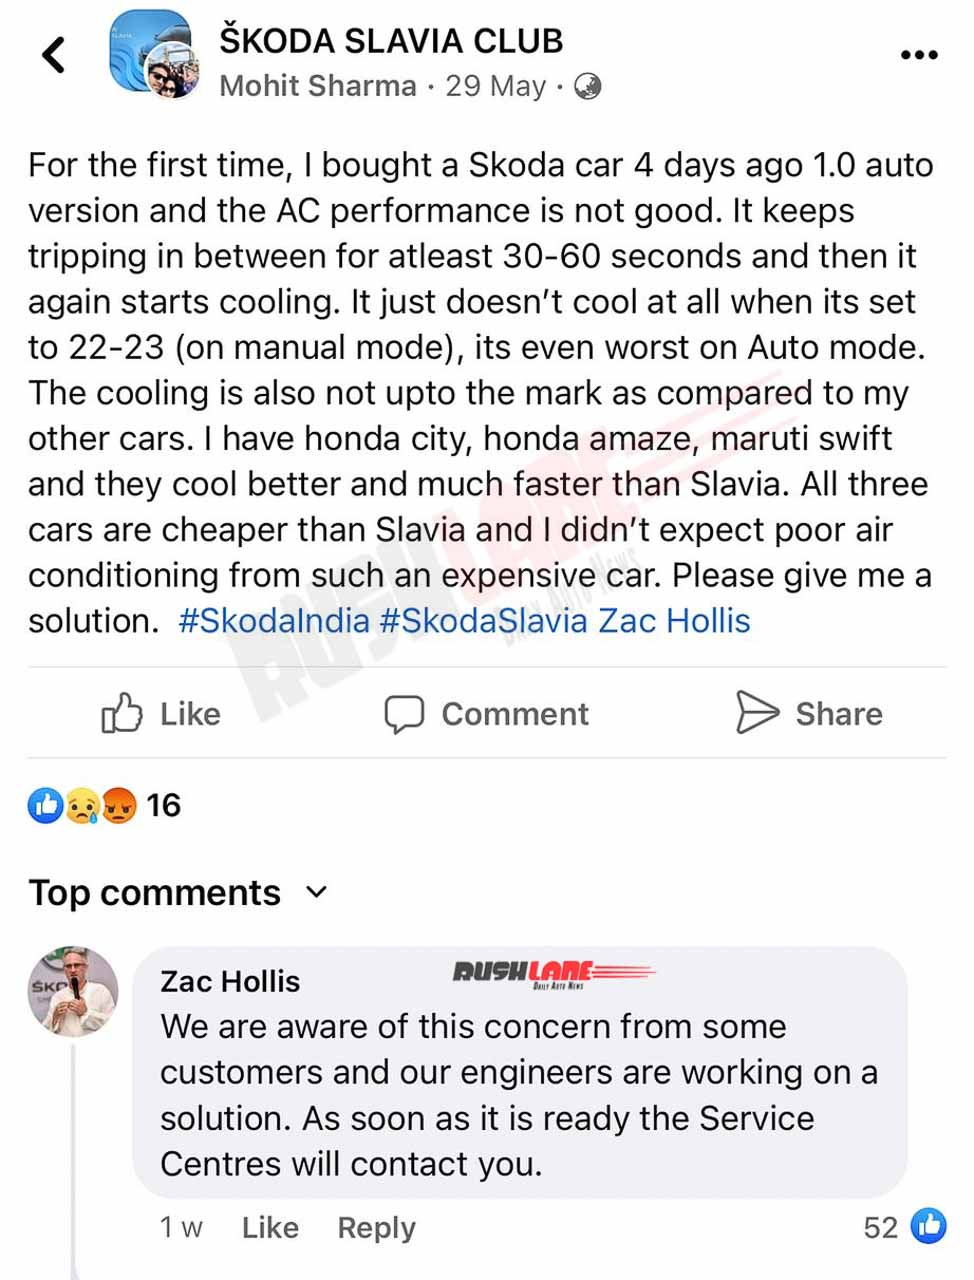 Skoda confirms they are working on fixing the AC issues